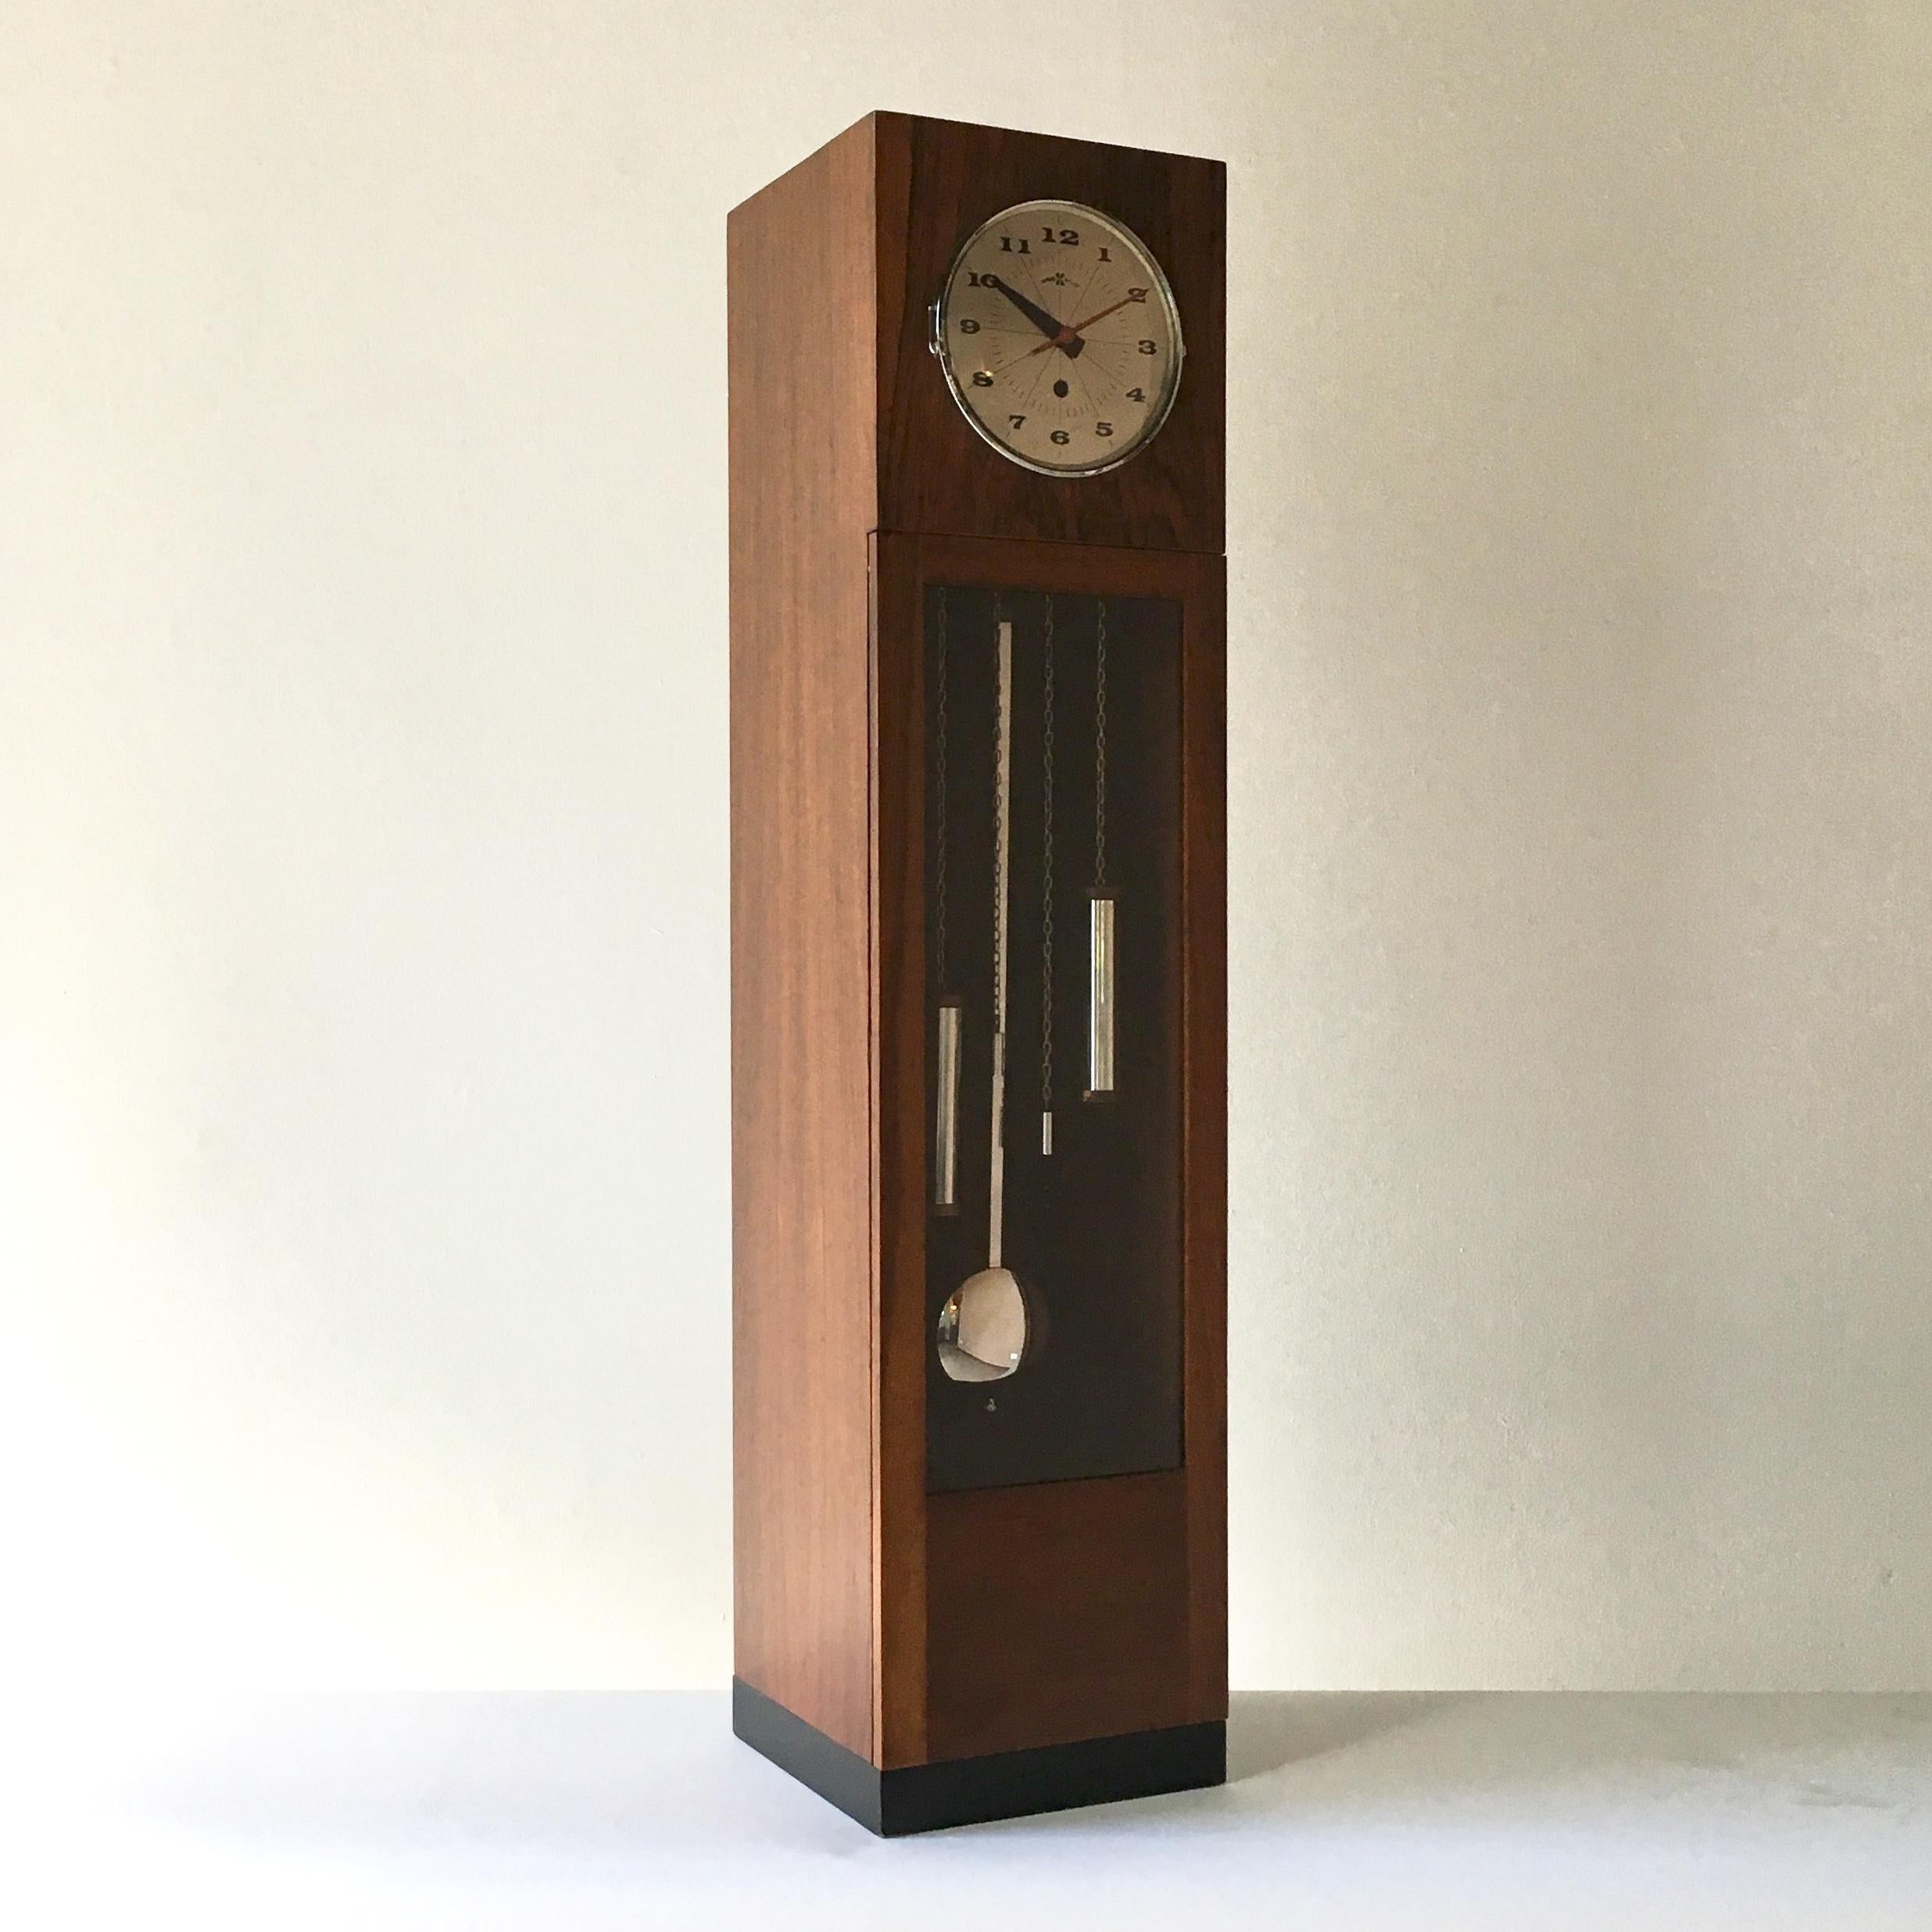 A miniature grandfather case clock designed by George Nelson for Howard Miller Clock Company, Zeeland, Michigan, 1960s, complete with pendulum and weights behind a glazed door, likewise with the clock face. 

Partial instructions on how to regulate